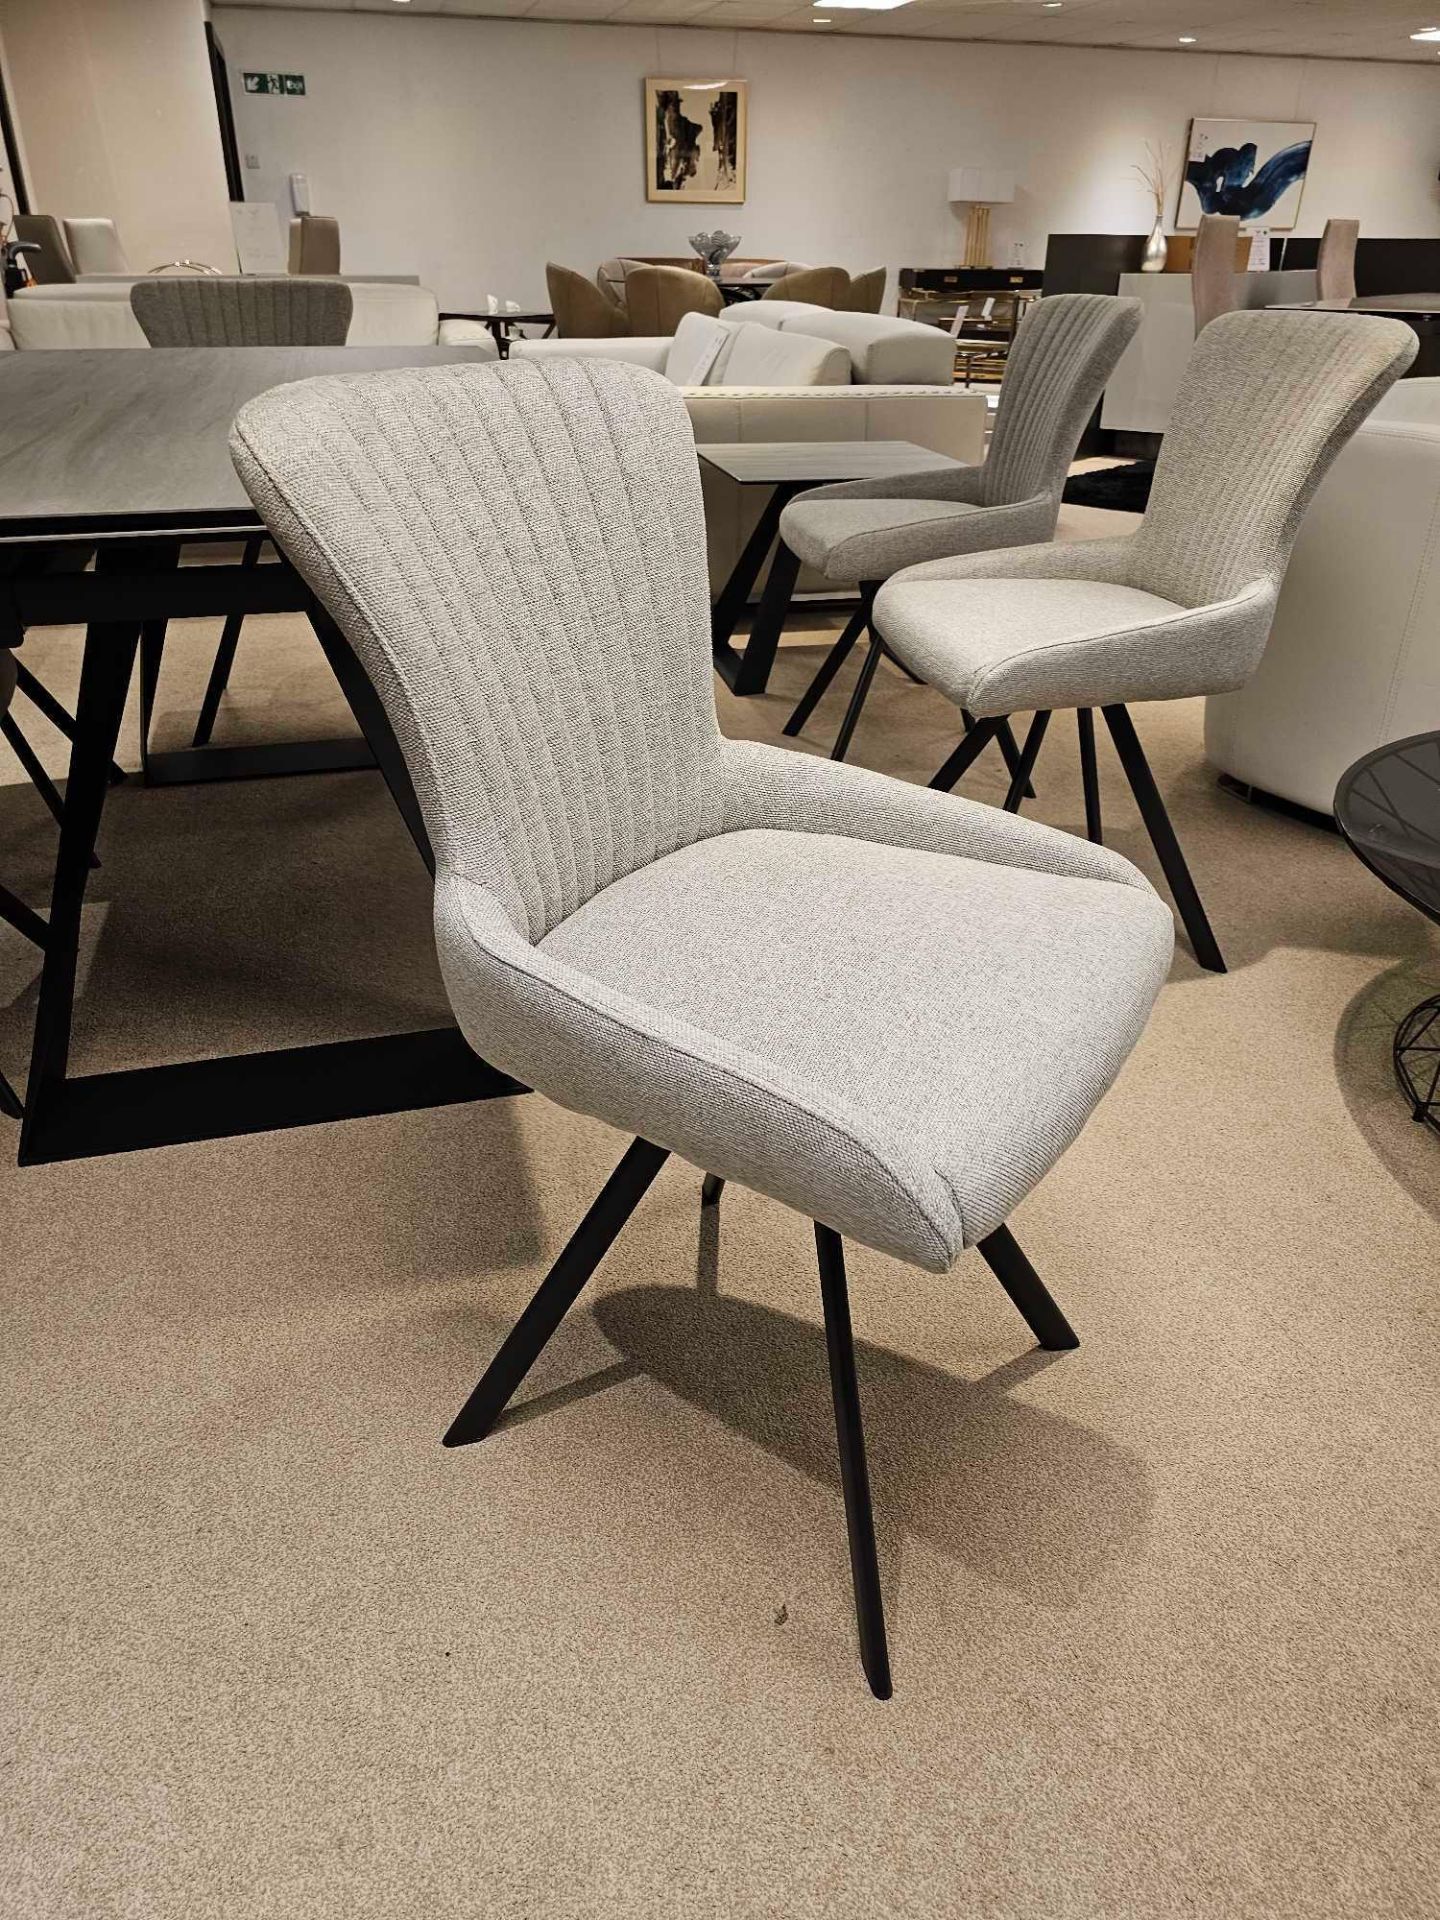 A Set of 6 x Maria Chairs by Kesterport Maria has the same self-return mechanism as many of the - Bild 2 aus 6